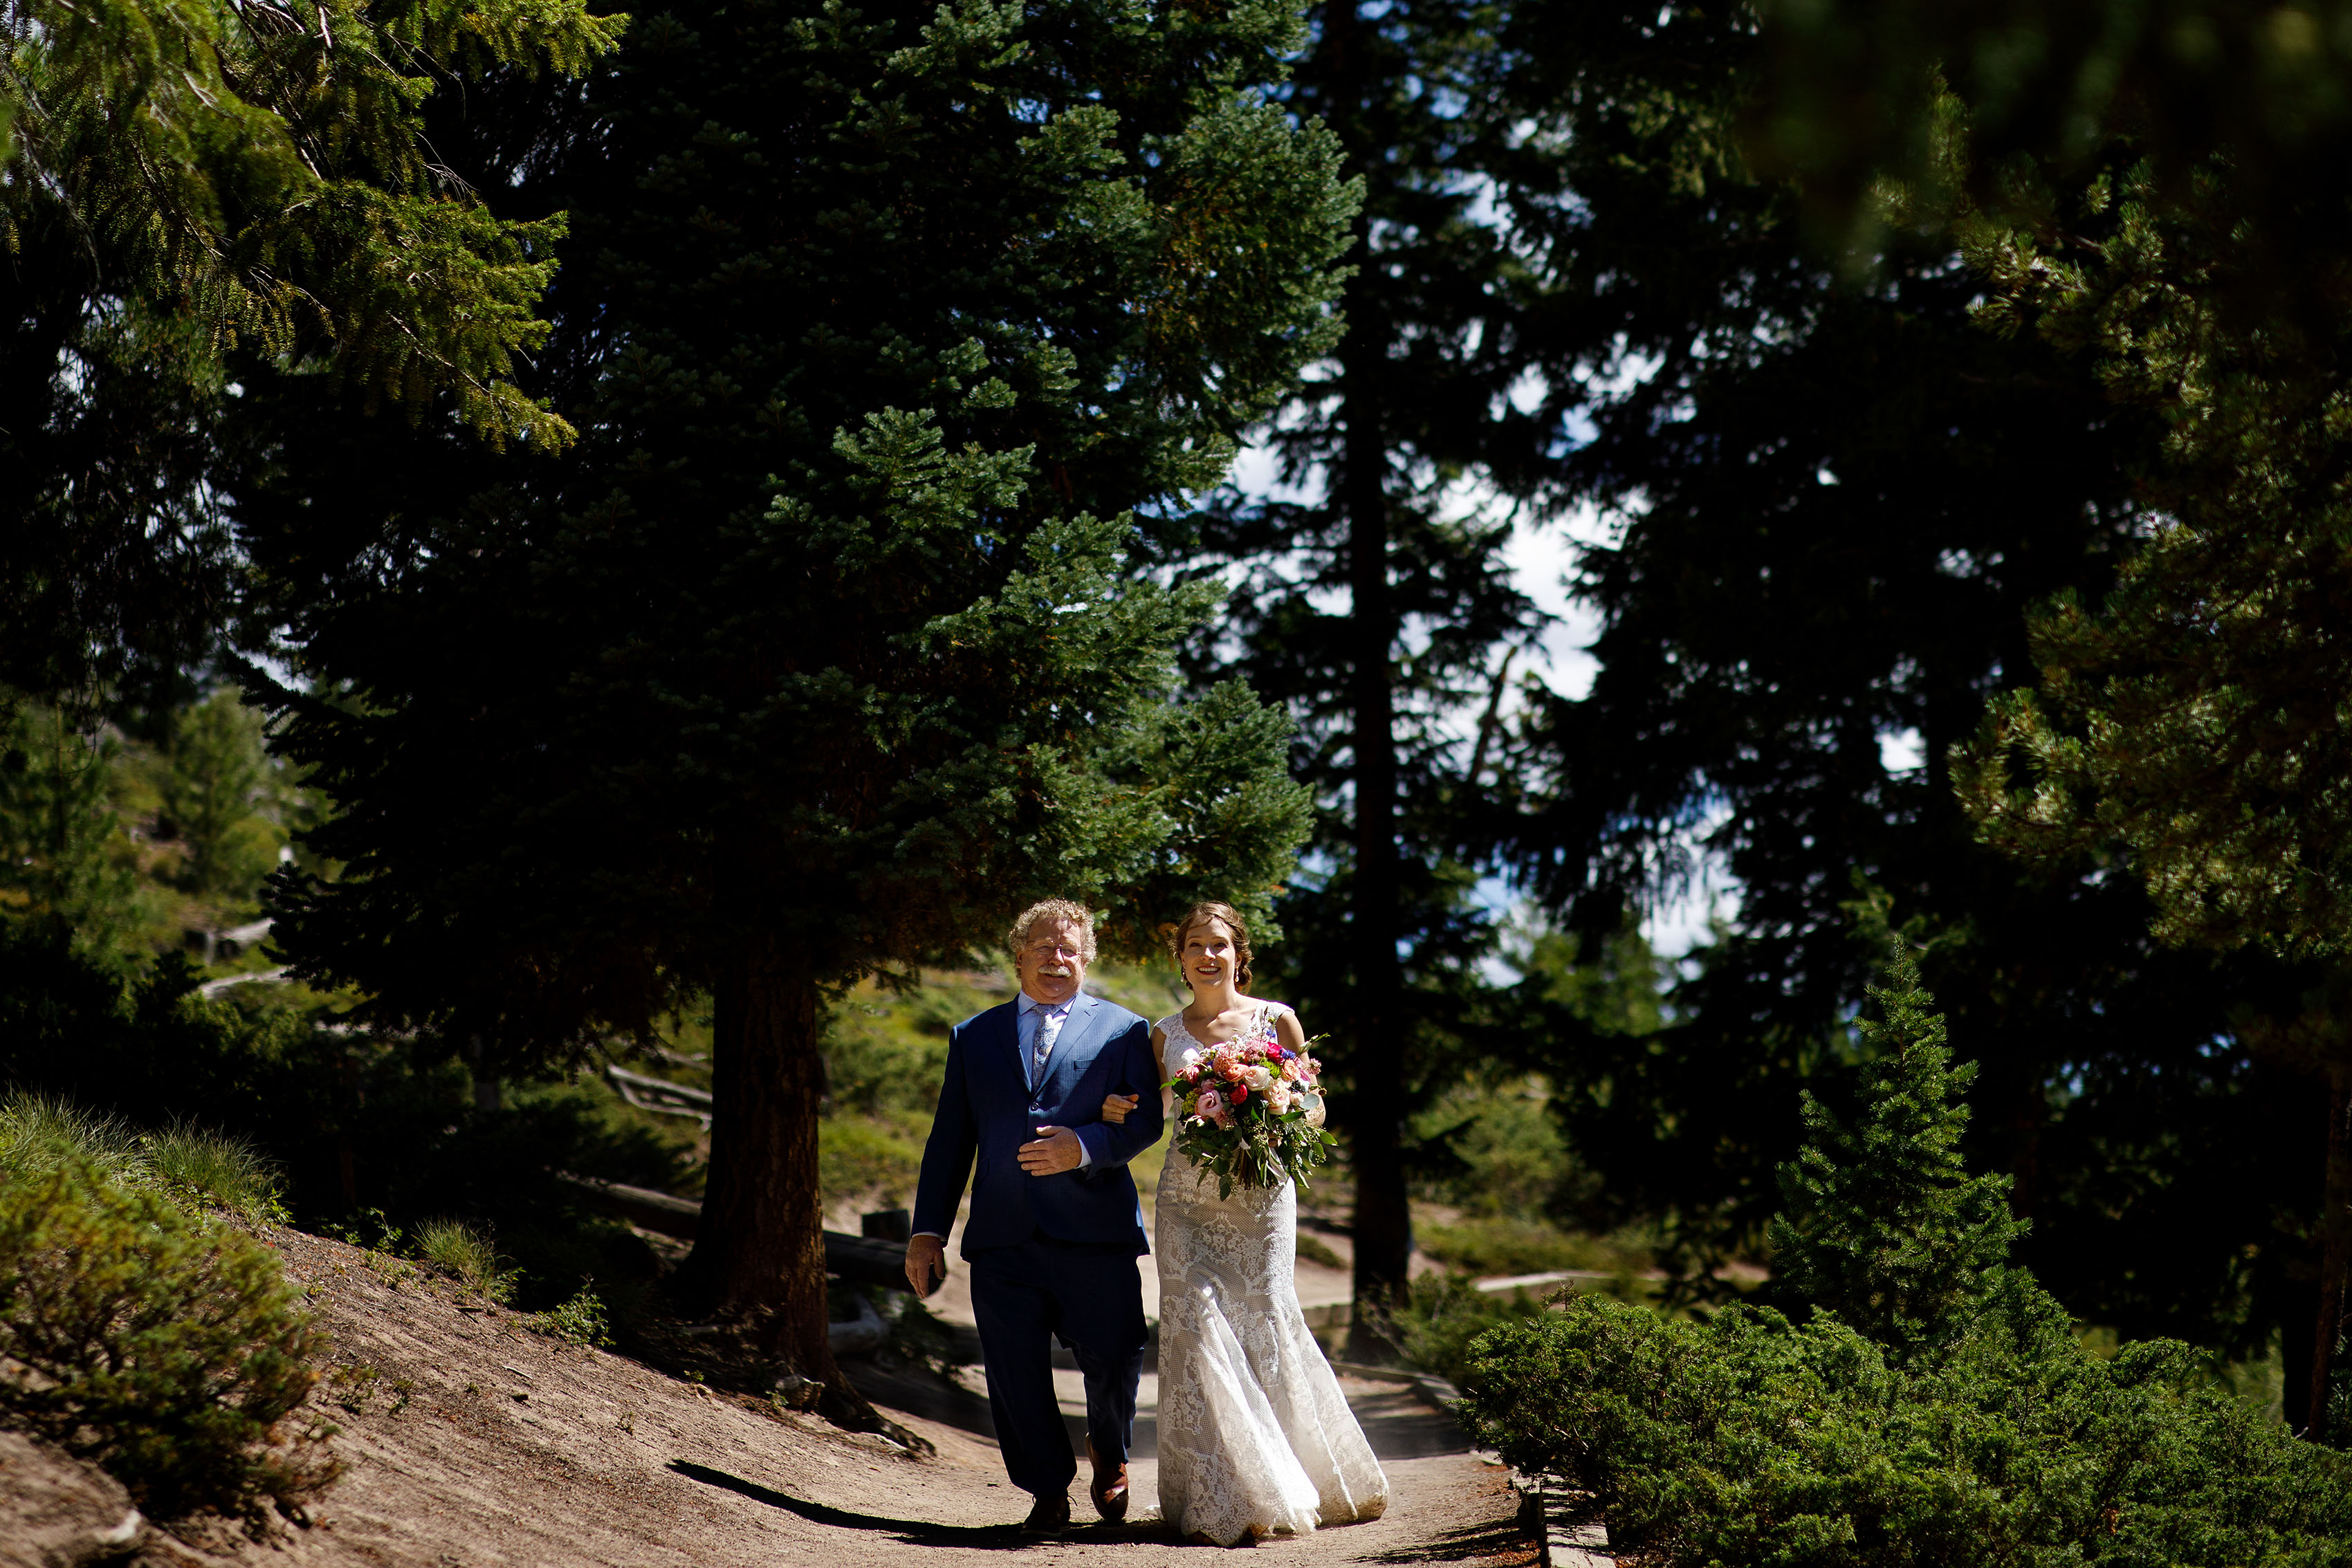 The bride walks down the path with her father at Sapphire Point